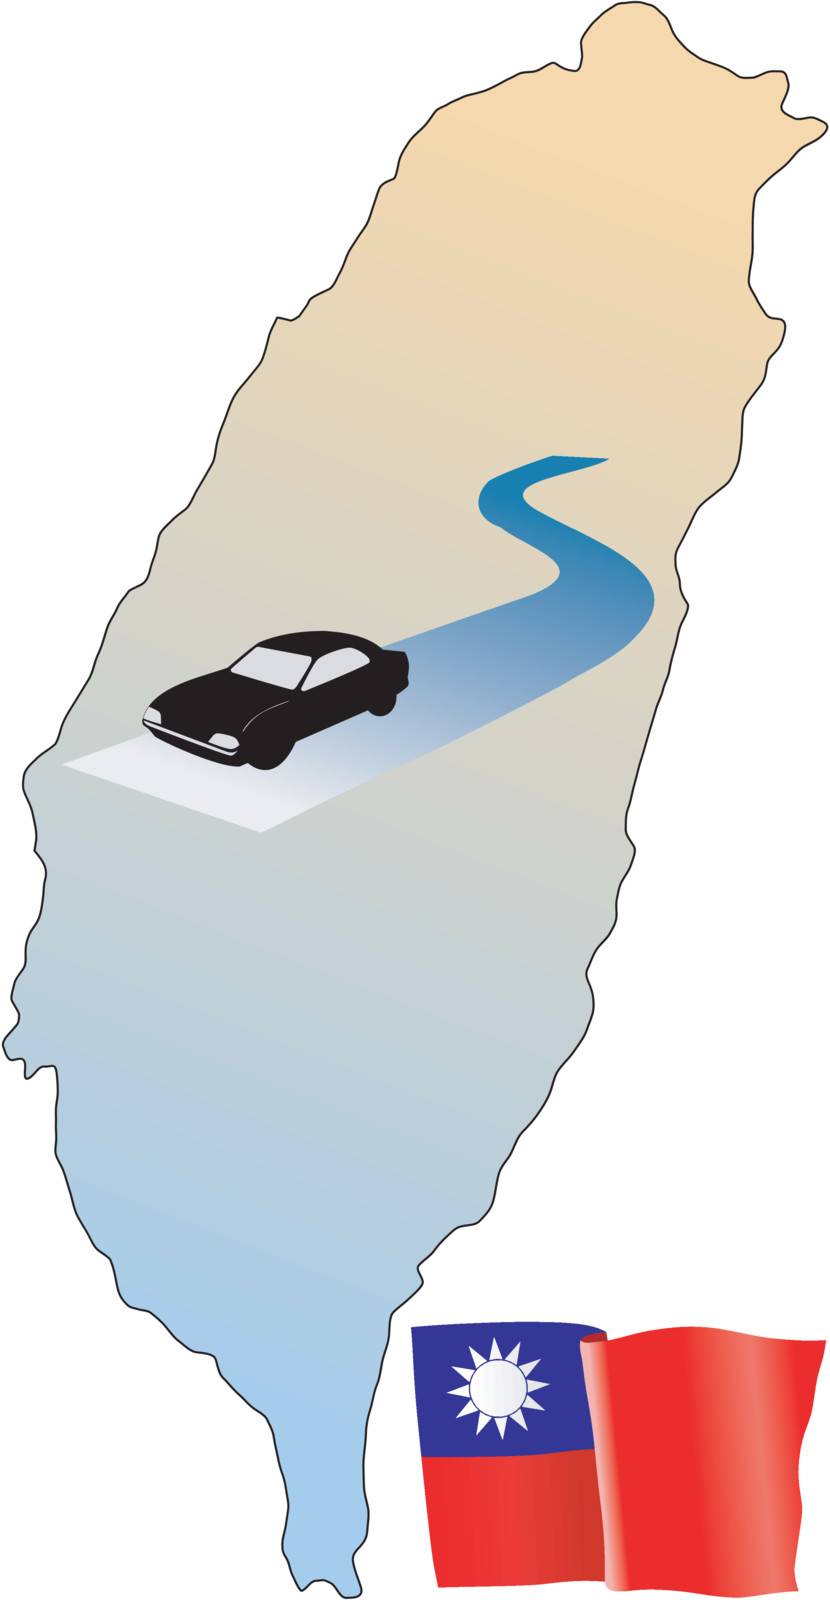 symbolic illustration of road with map